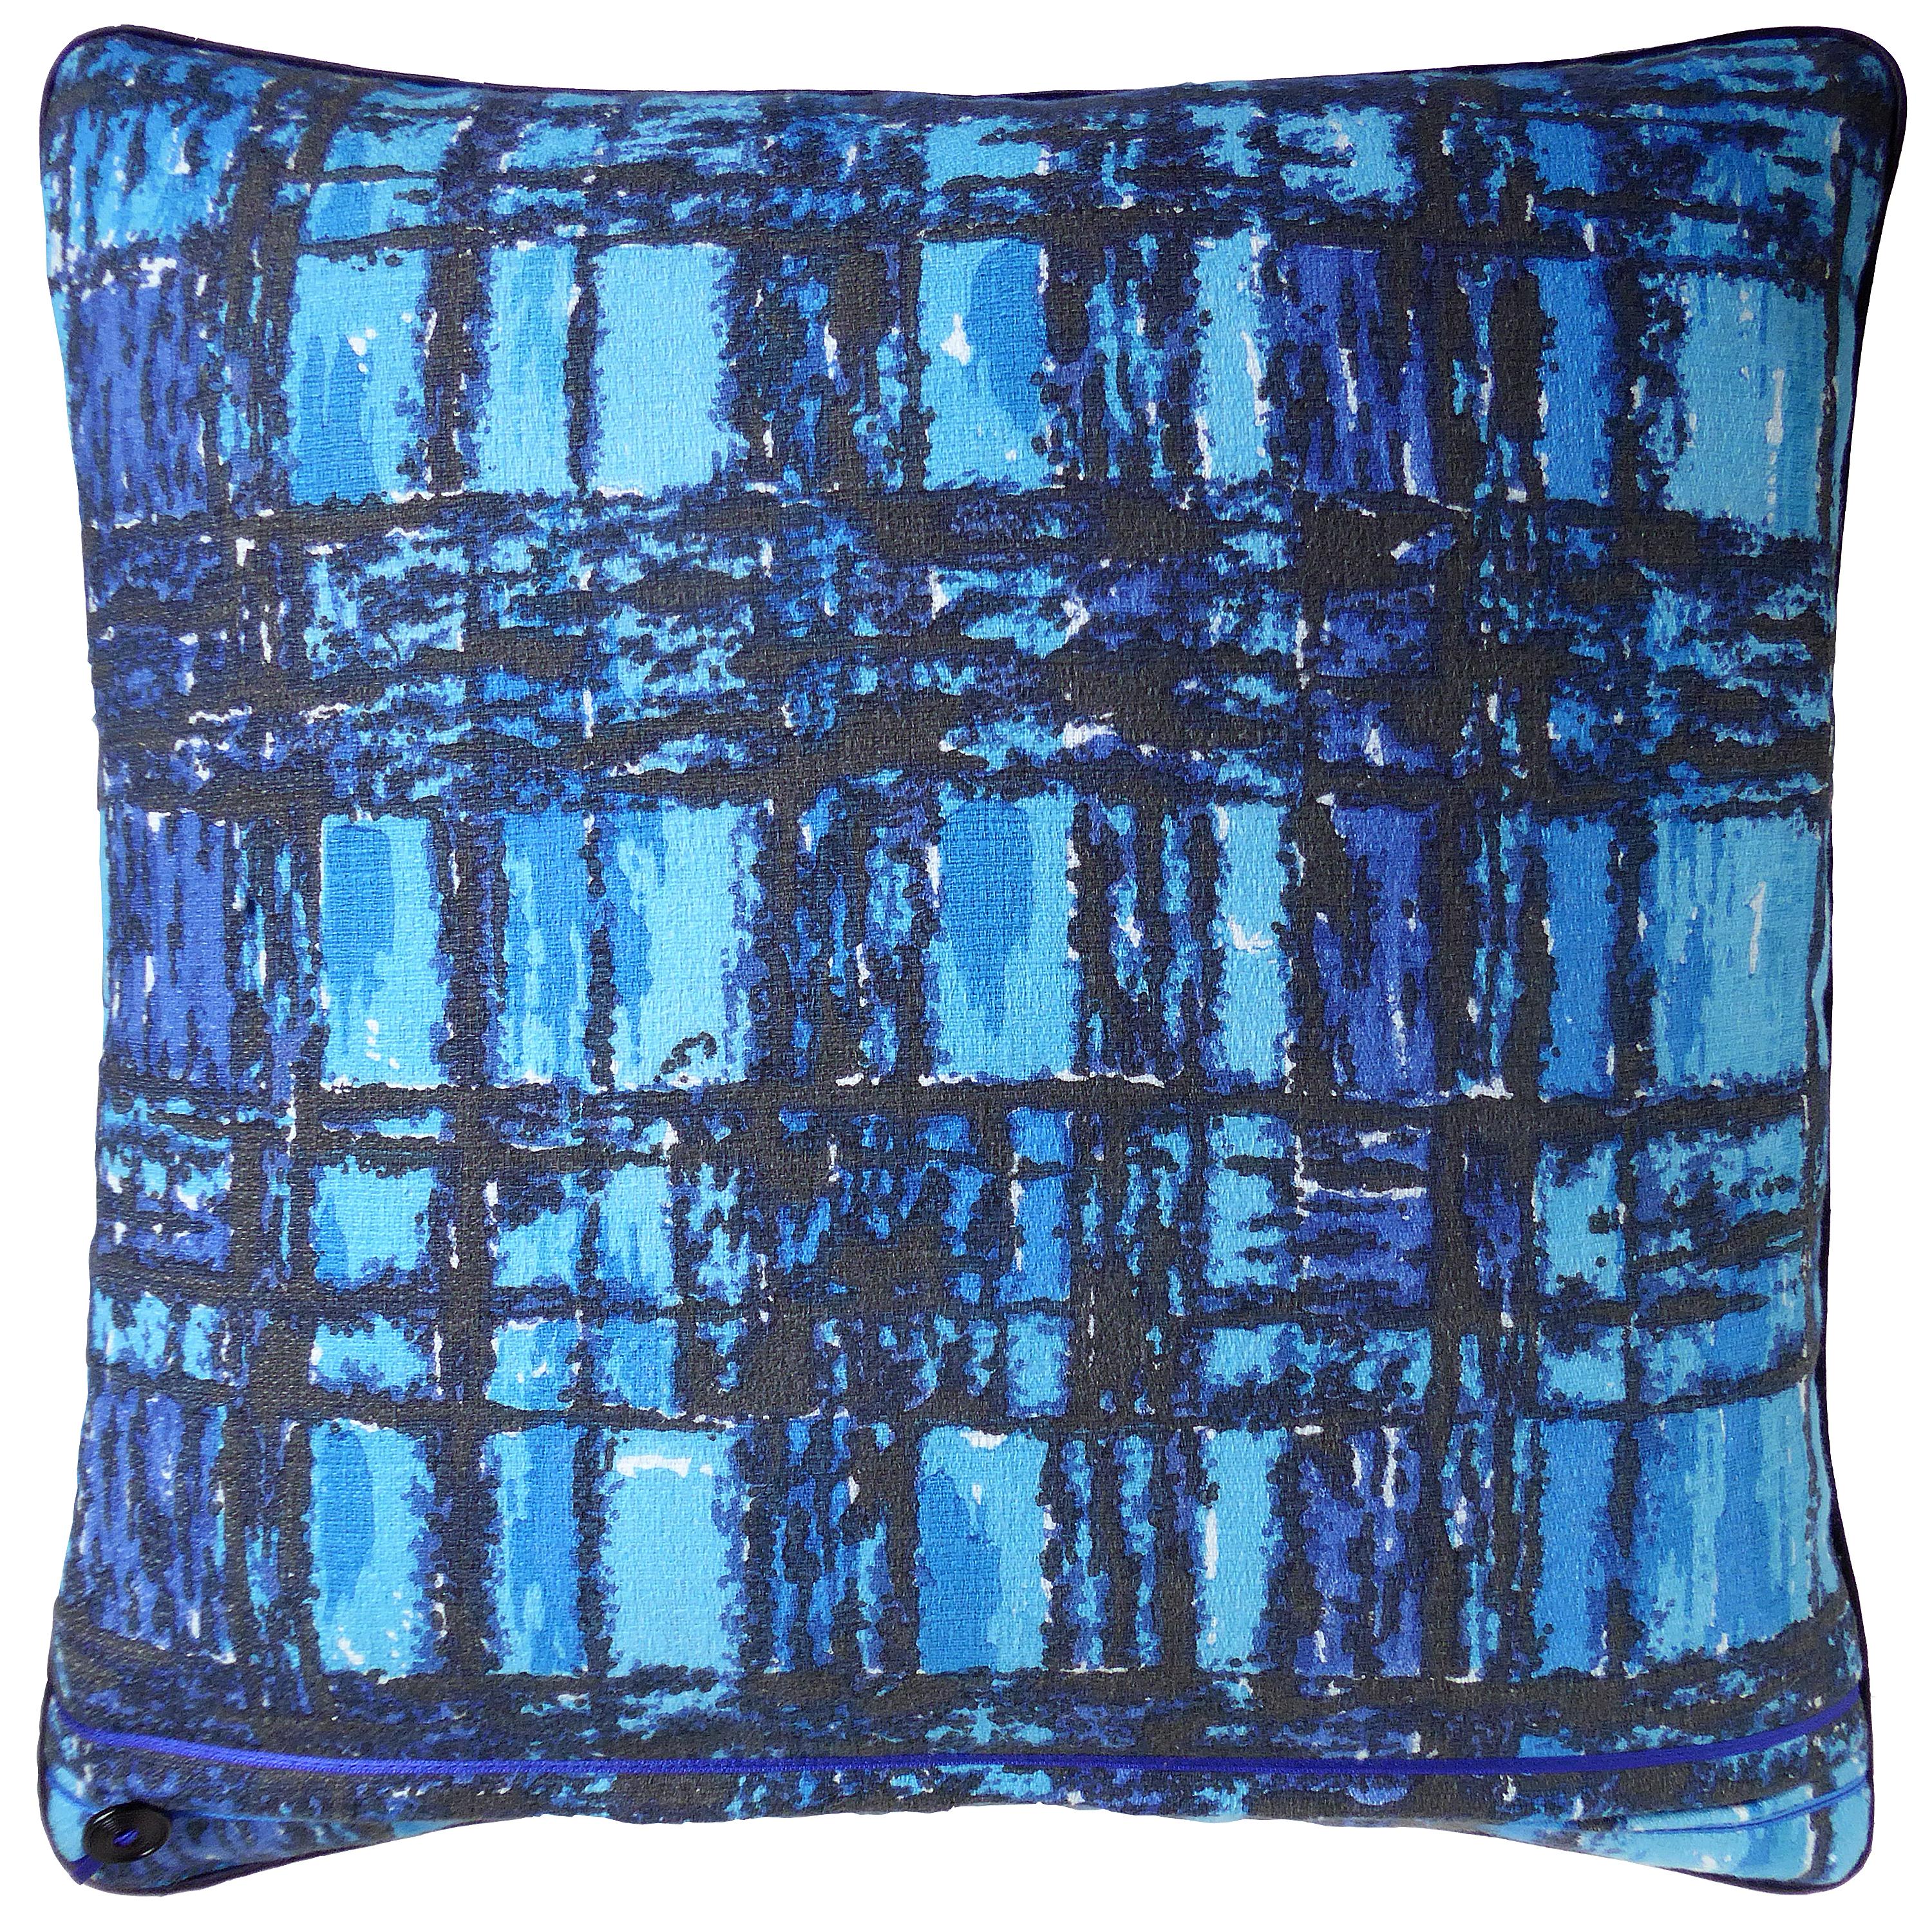 Vintage Cushions 'Nicholls Checks',
circa 1960
British bespoke made retro styled cushion created by using original vintage mid-century fabric in a vibrant cobalt blue
Provenance; Britain
Made by Nichollette Yardley-Moore
Cotton bark cloth with full